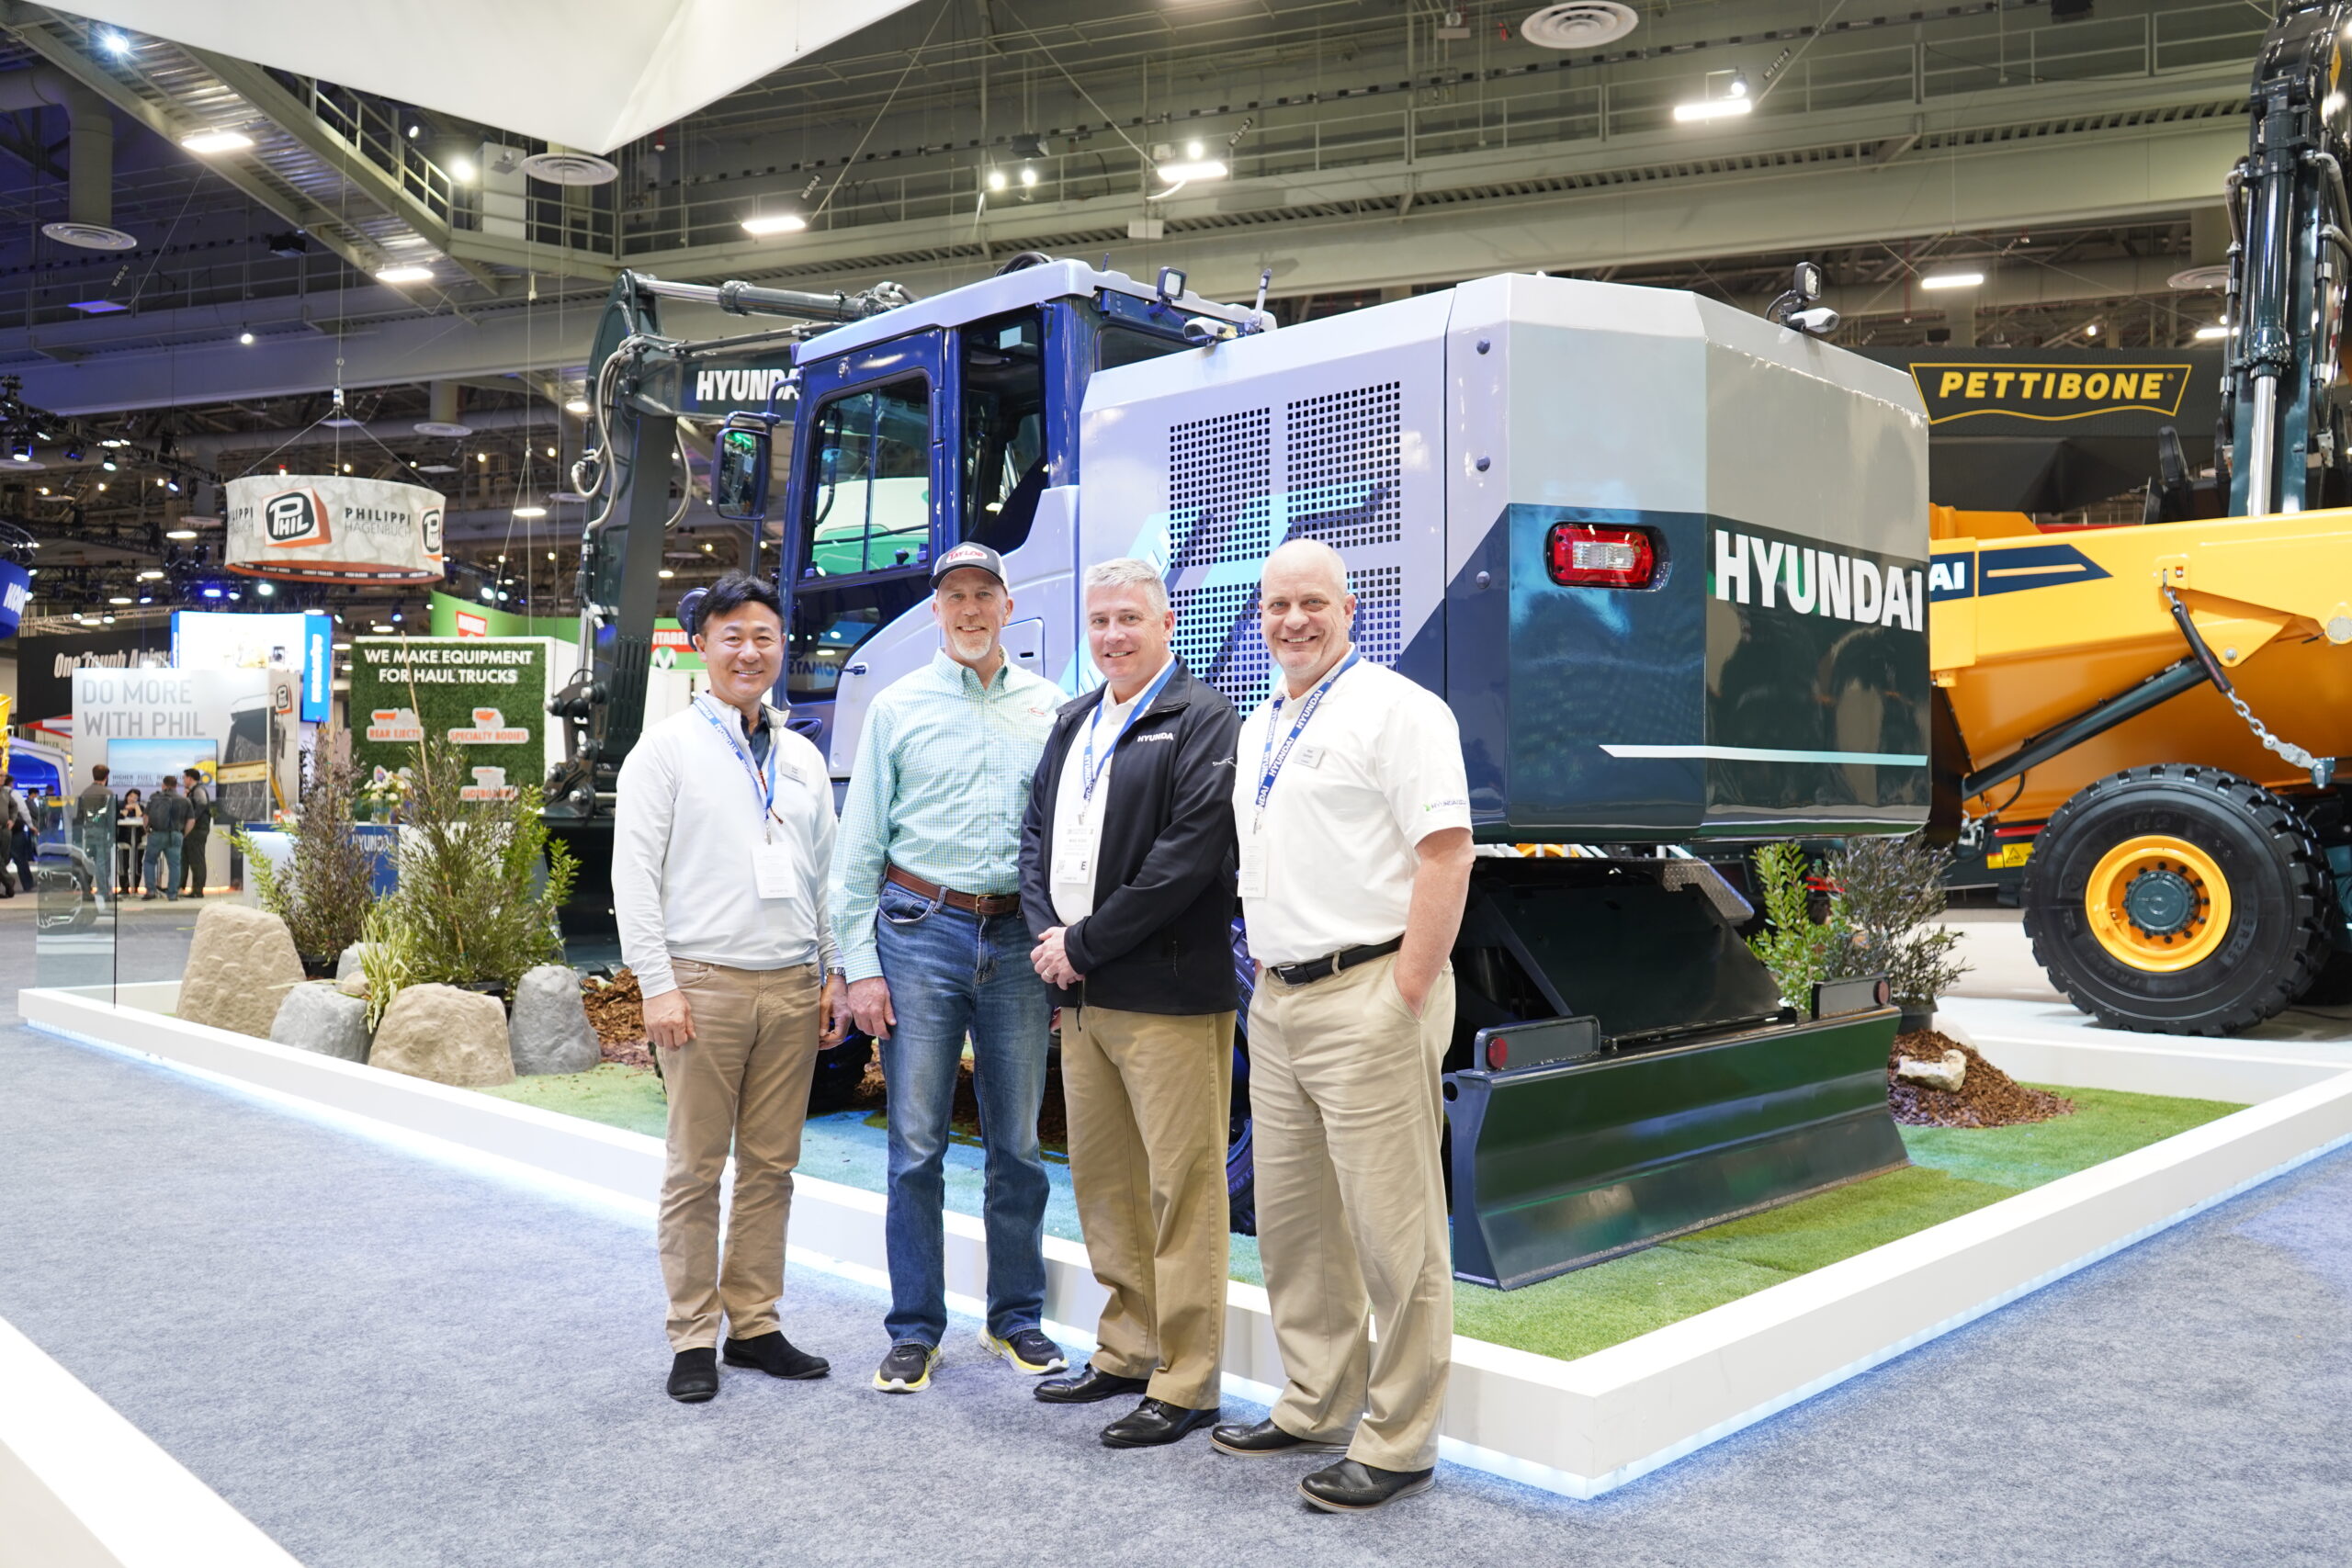 Hyundai Dealer Taylor Construction Equipment Adds Parts of Indiana, Ohio to Its Sales Territory